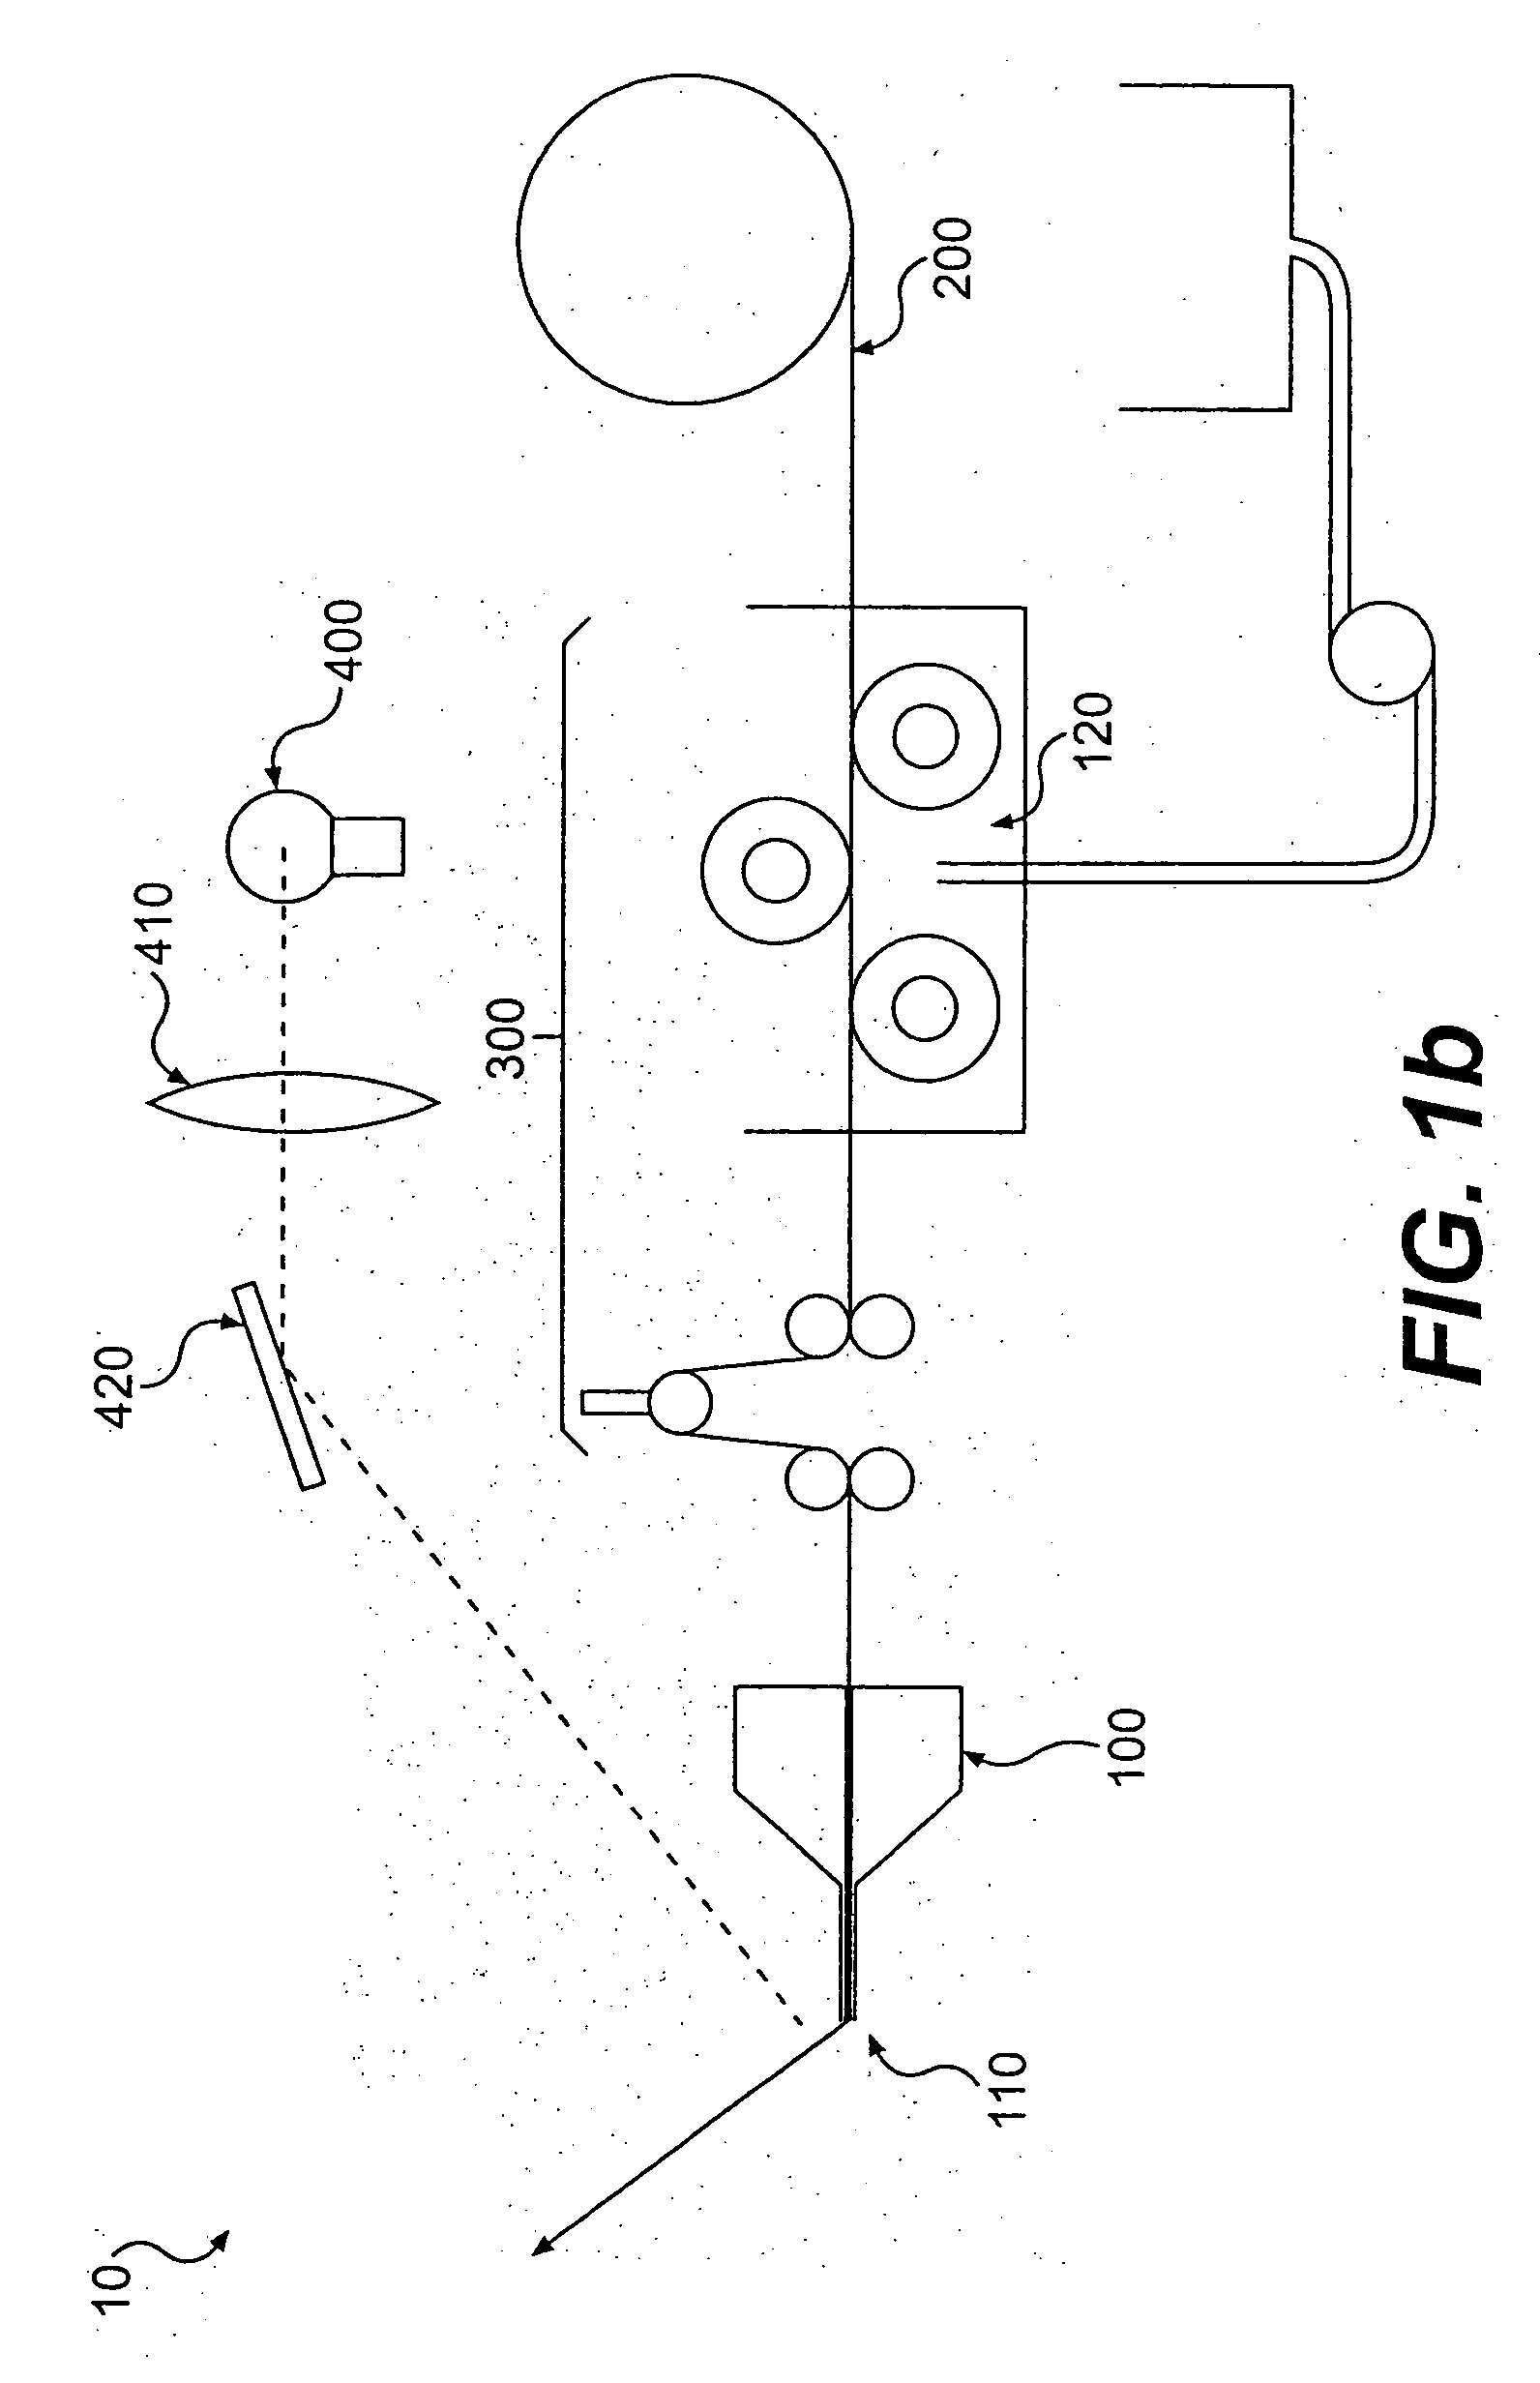 Apparatus for fabricating fiber reinforced plastic parts